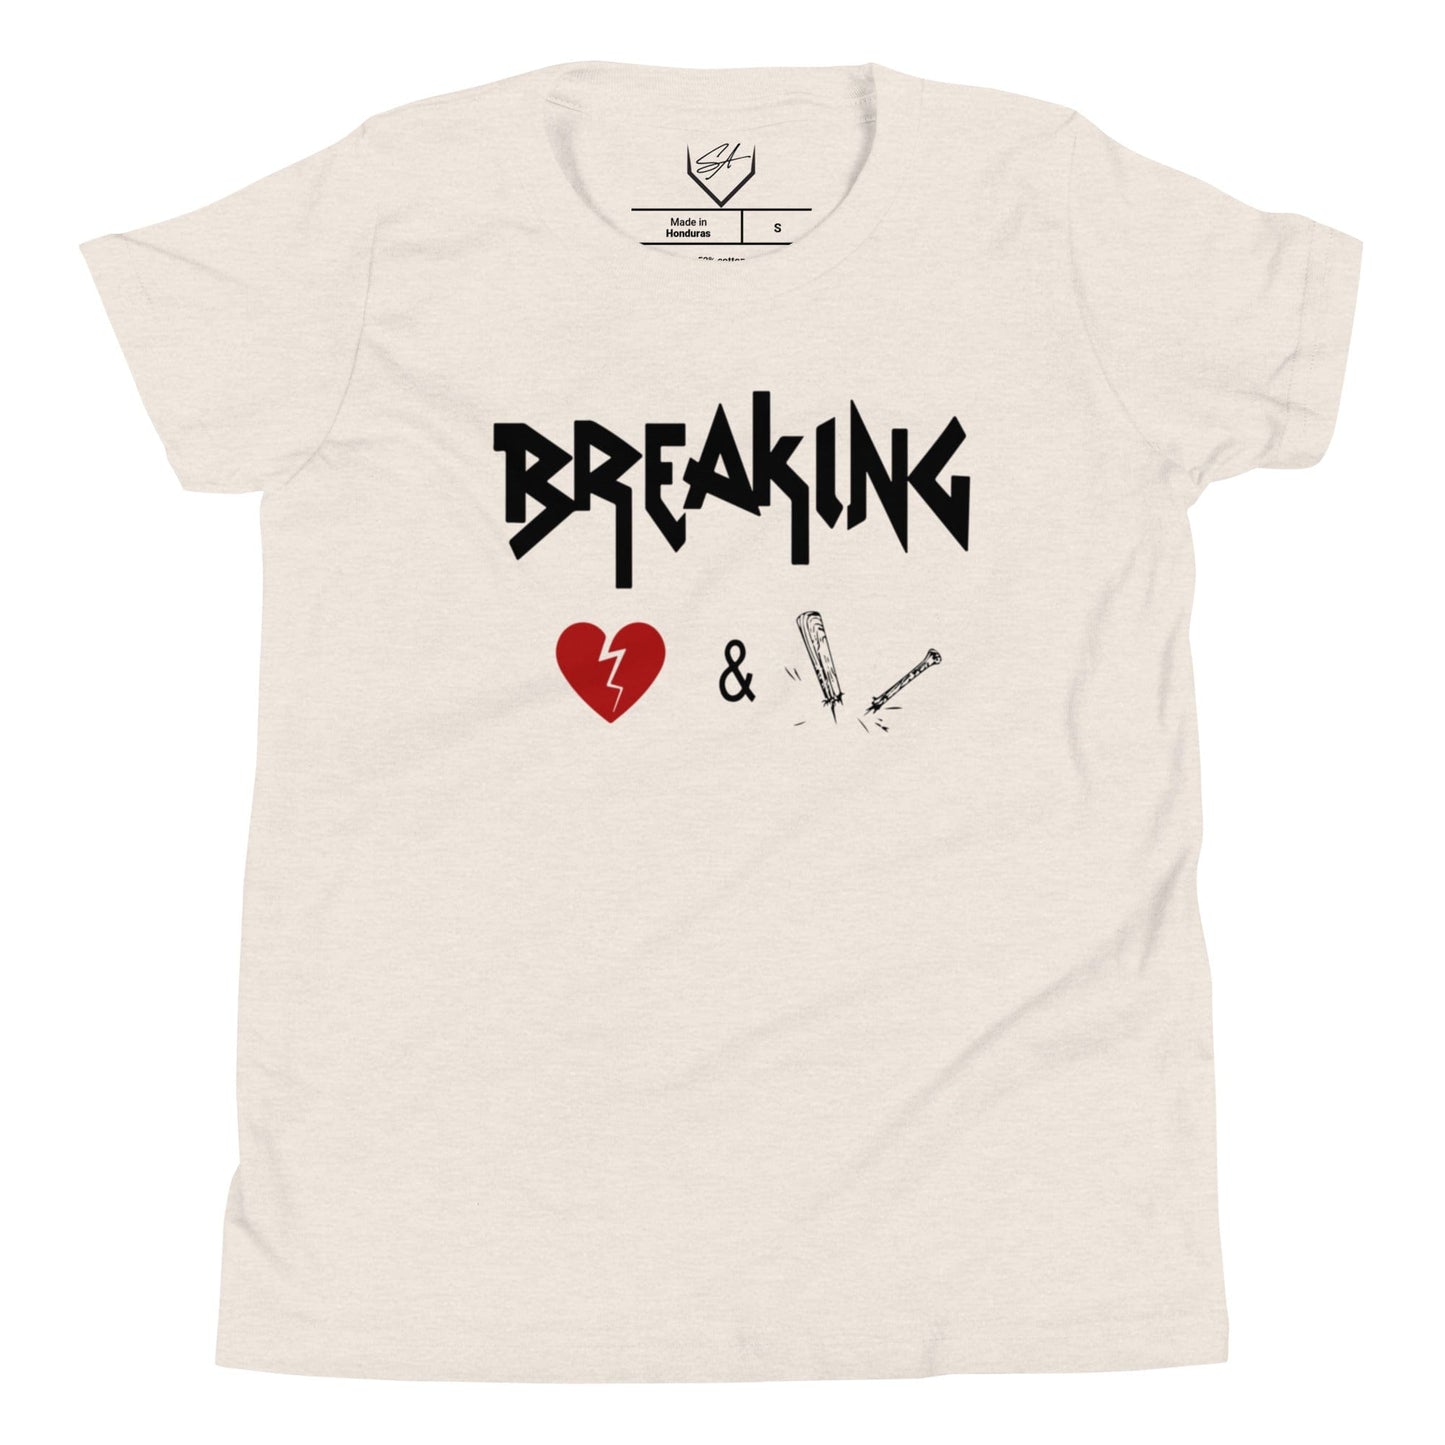 Breaking Hearts And Bats - Youth Tee